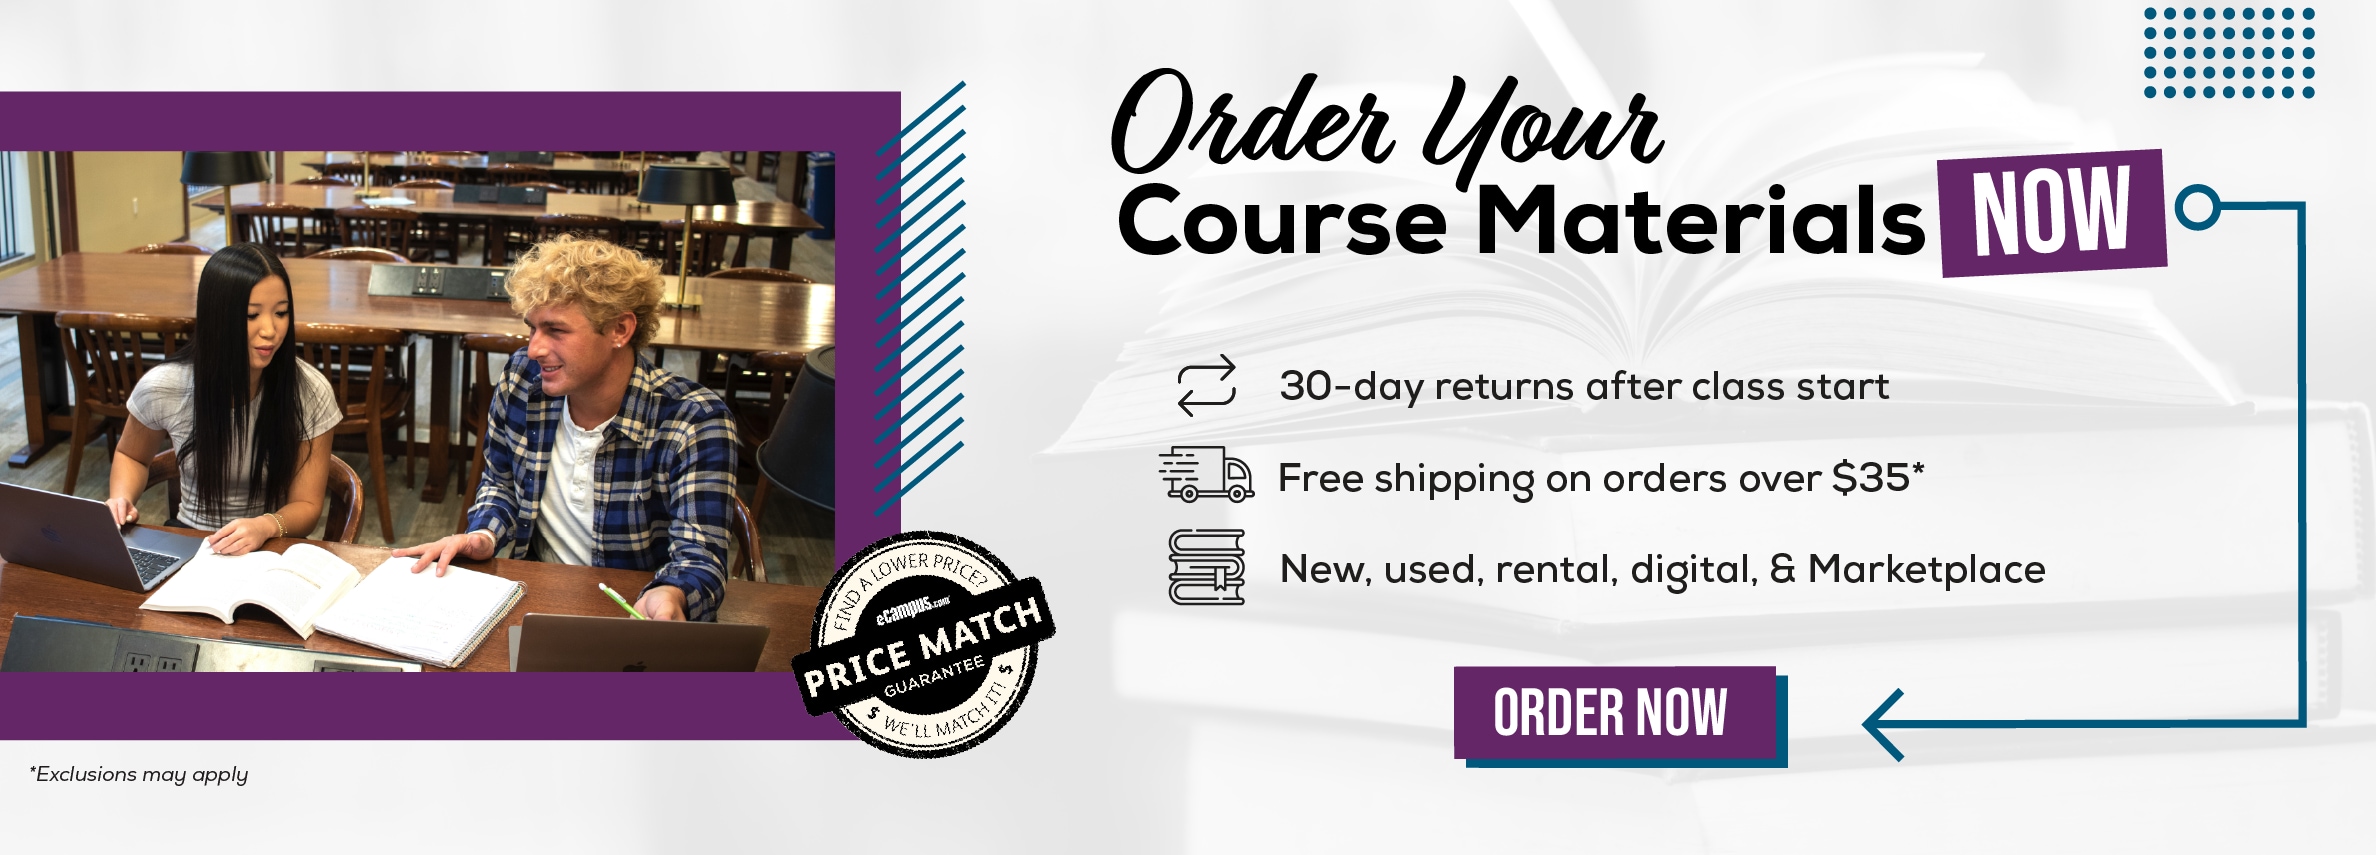 Order Your Course Materials Now. 30-day returns after class start. Free shipping on orders over $35* New, used, rental, digital, & Marketplace. Order now. *Exclusions may apply.